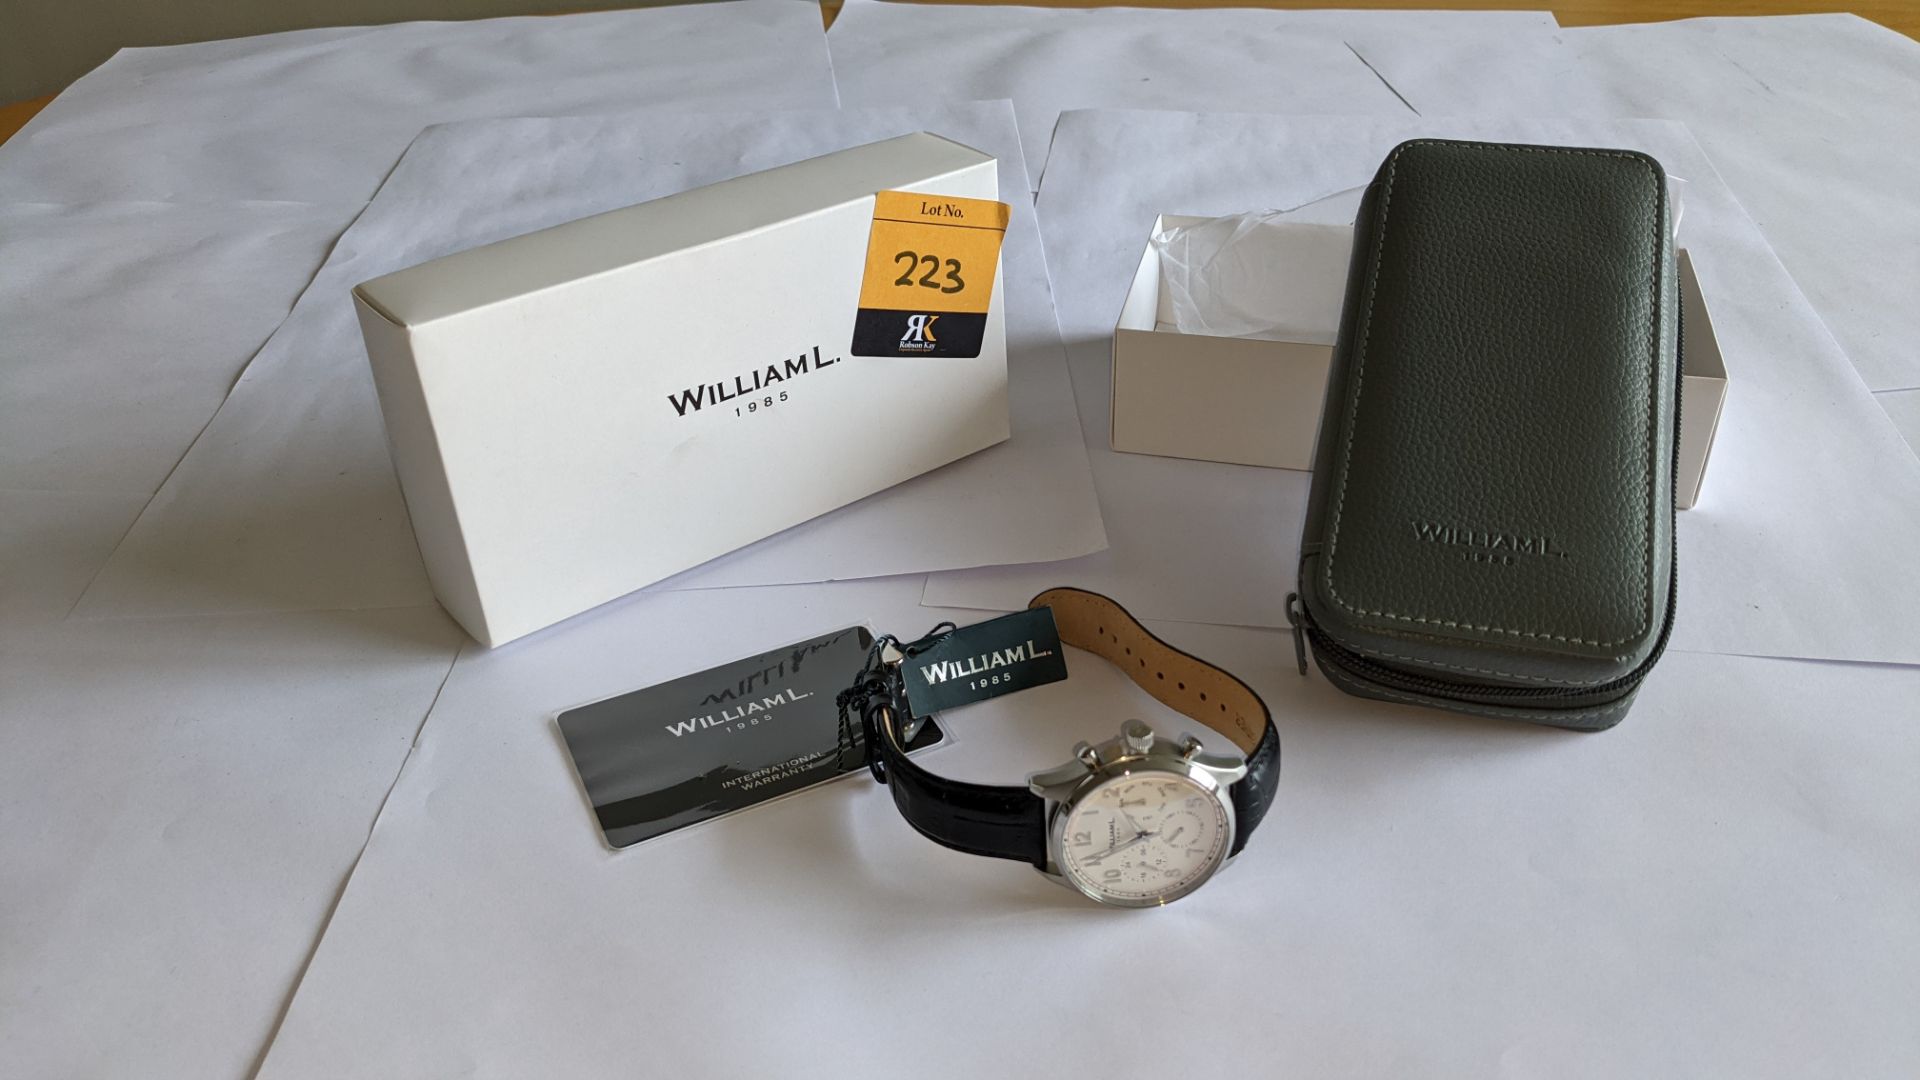 William L 1985 stainless steel watch, 5 ATM water resistant, leather strap, RRP £129. Includes box - Image 2 of 17